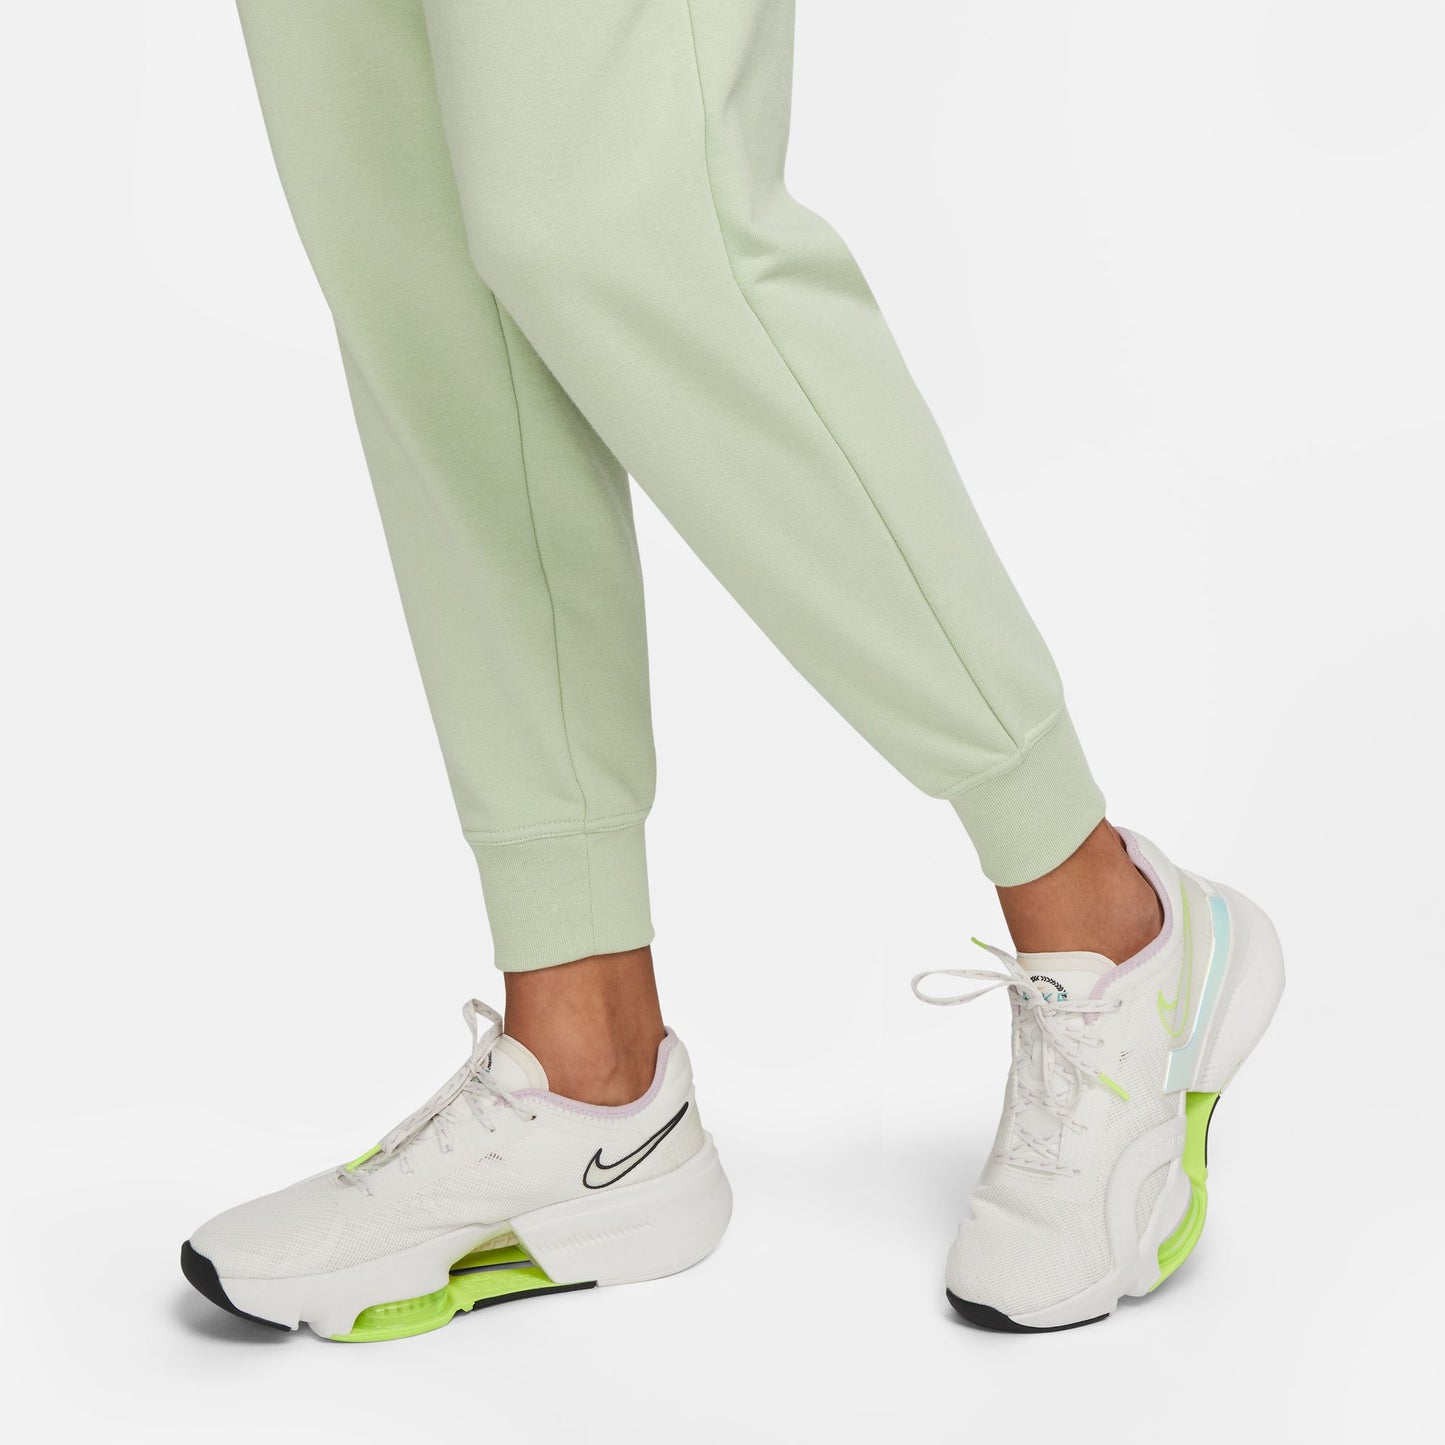 Nike Dri-FIT Women's High-Waisted 7/8 French Terry Joggers